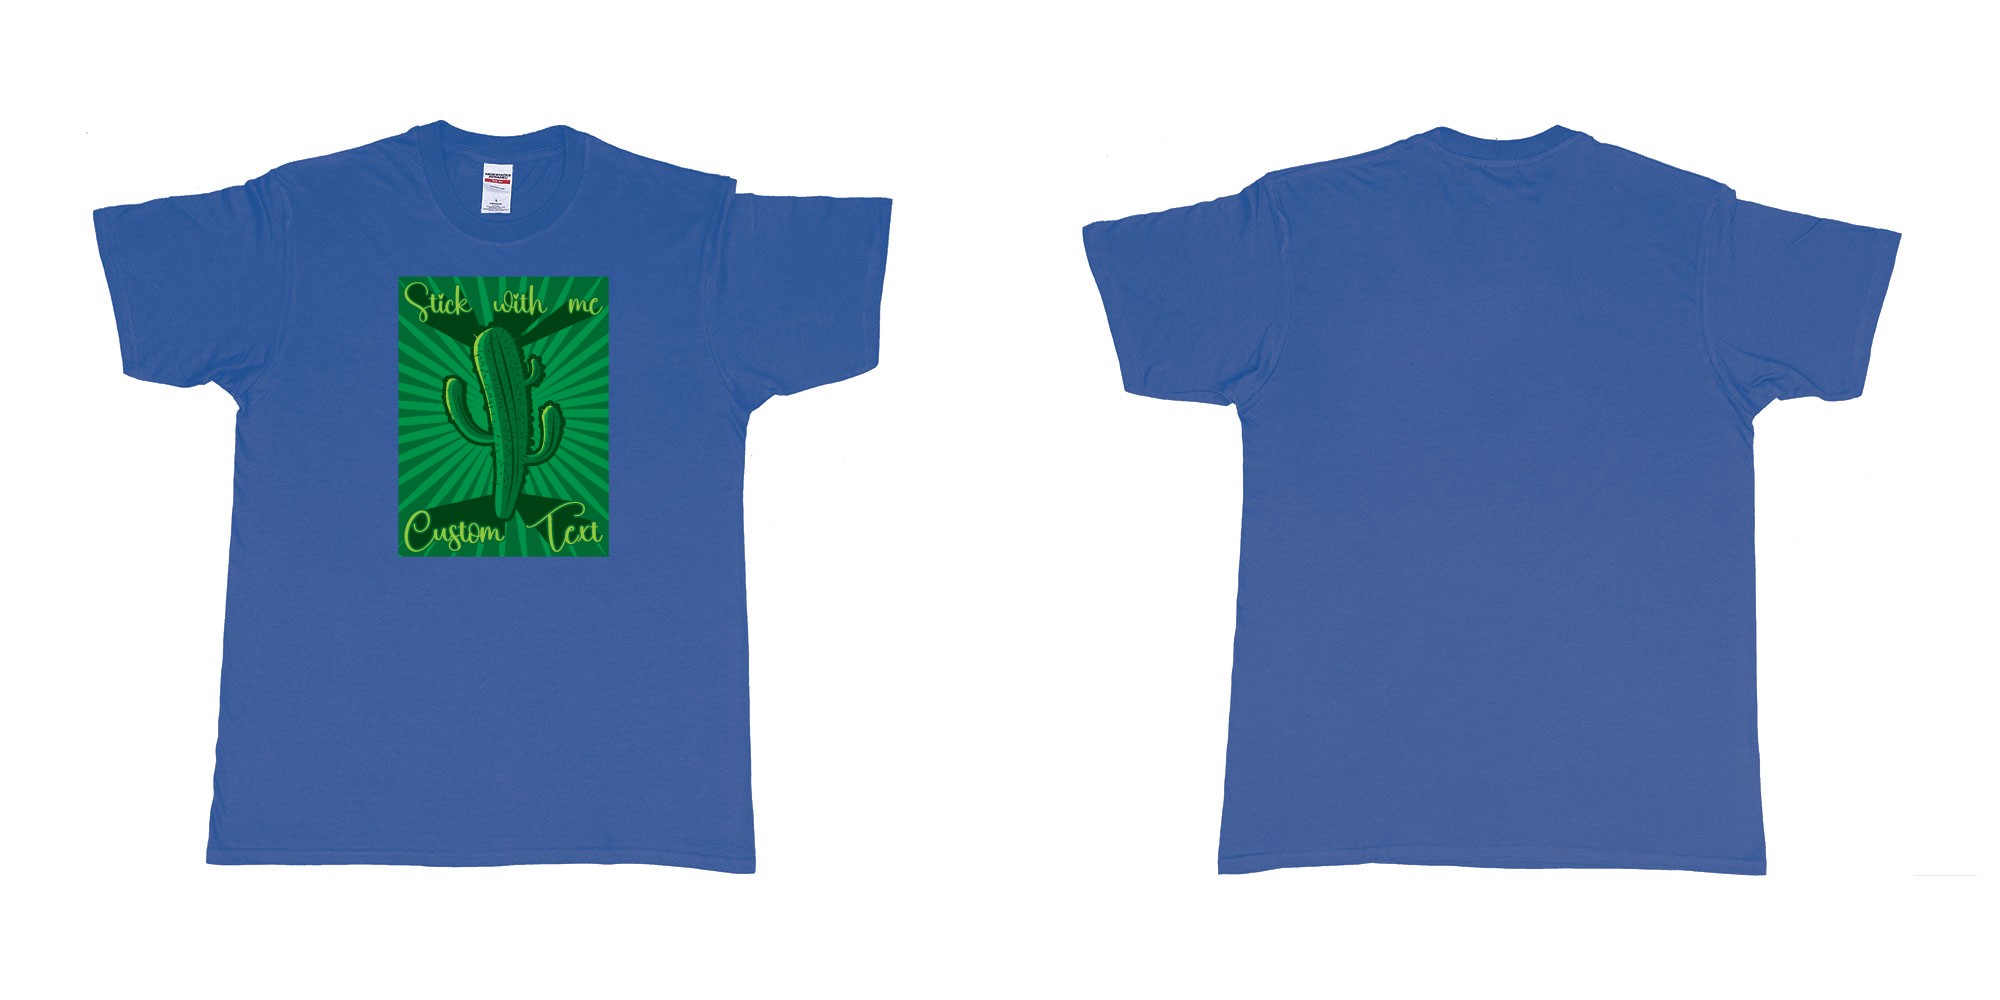 Custom tshirt design cactus stick with me in fabric color royal-blue choice your own text made in Bali by The Pirate Way